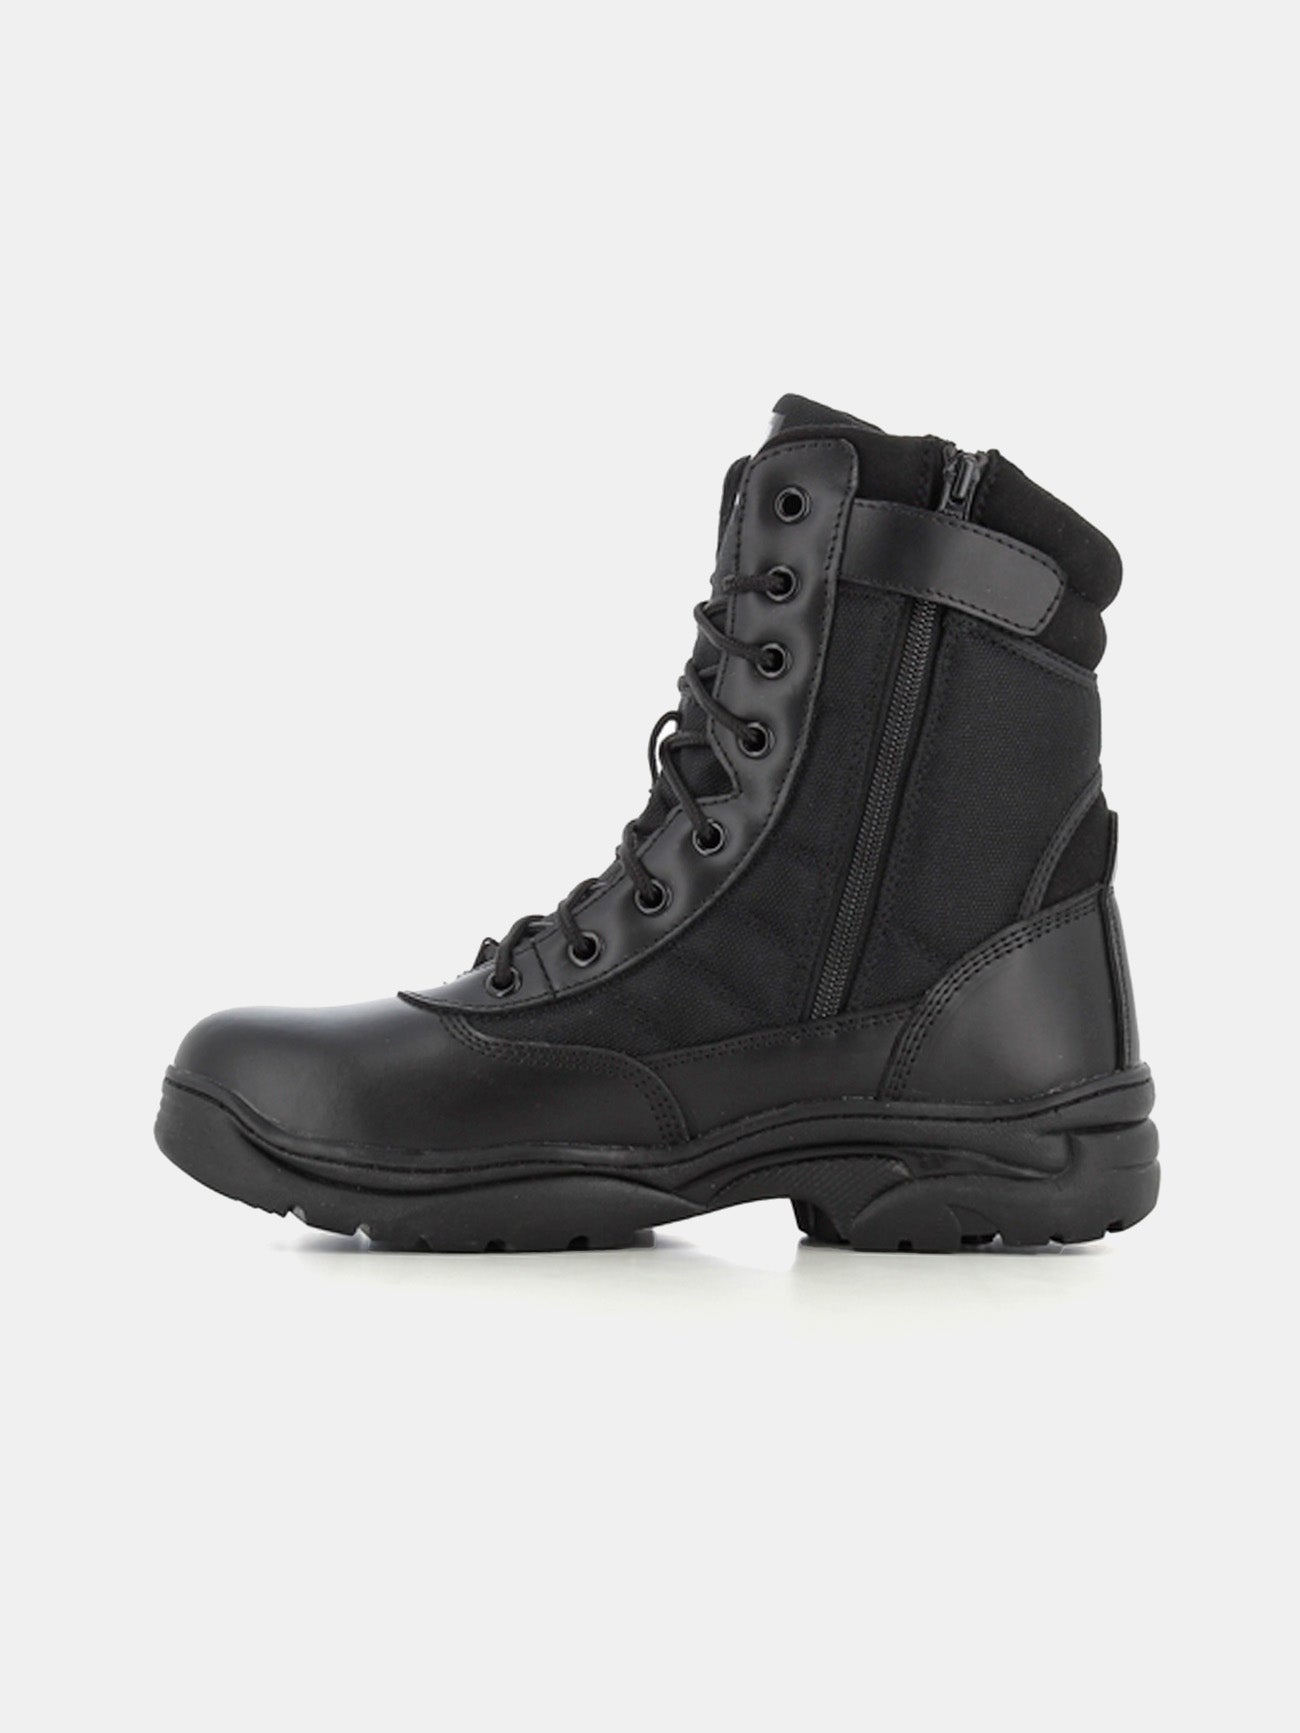 Safety Jogger Men's Tactic Boots